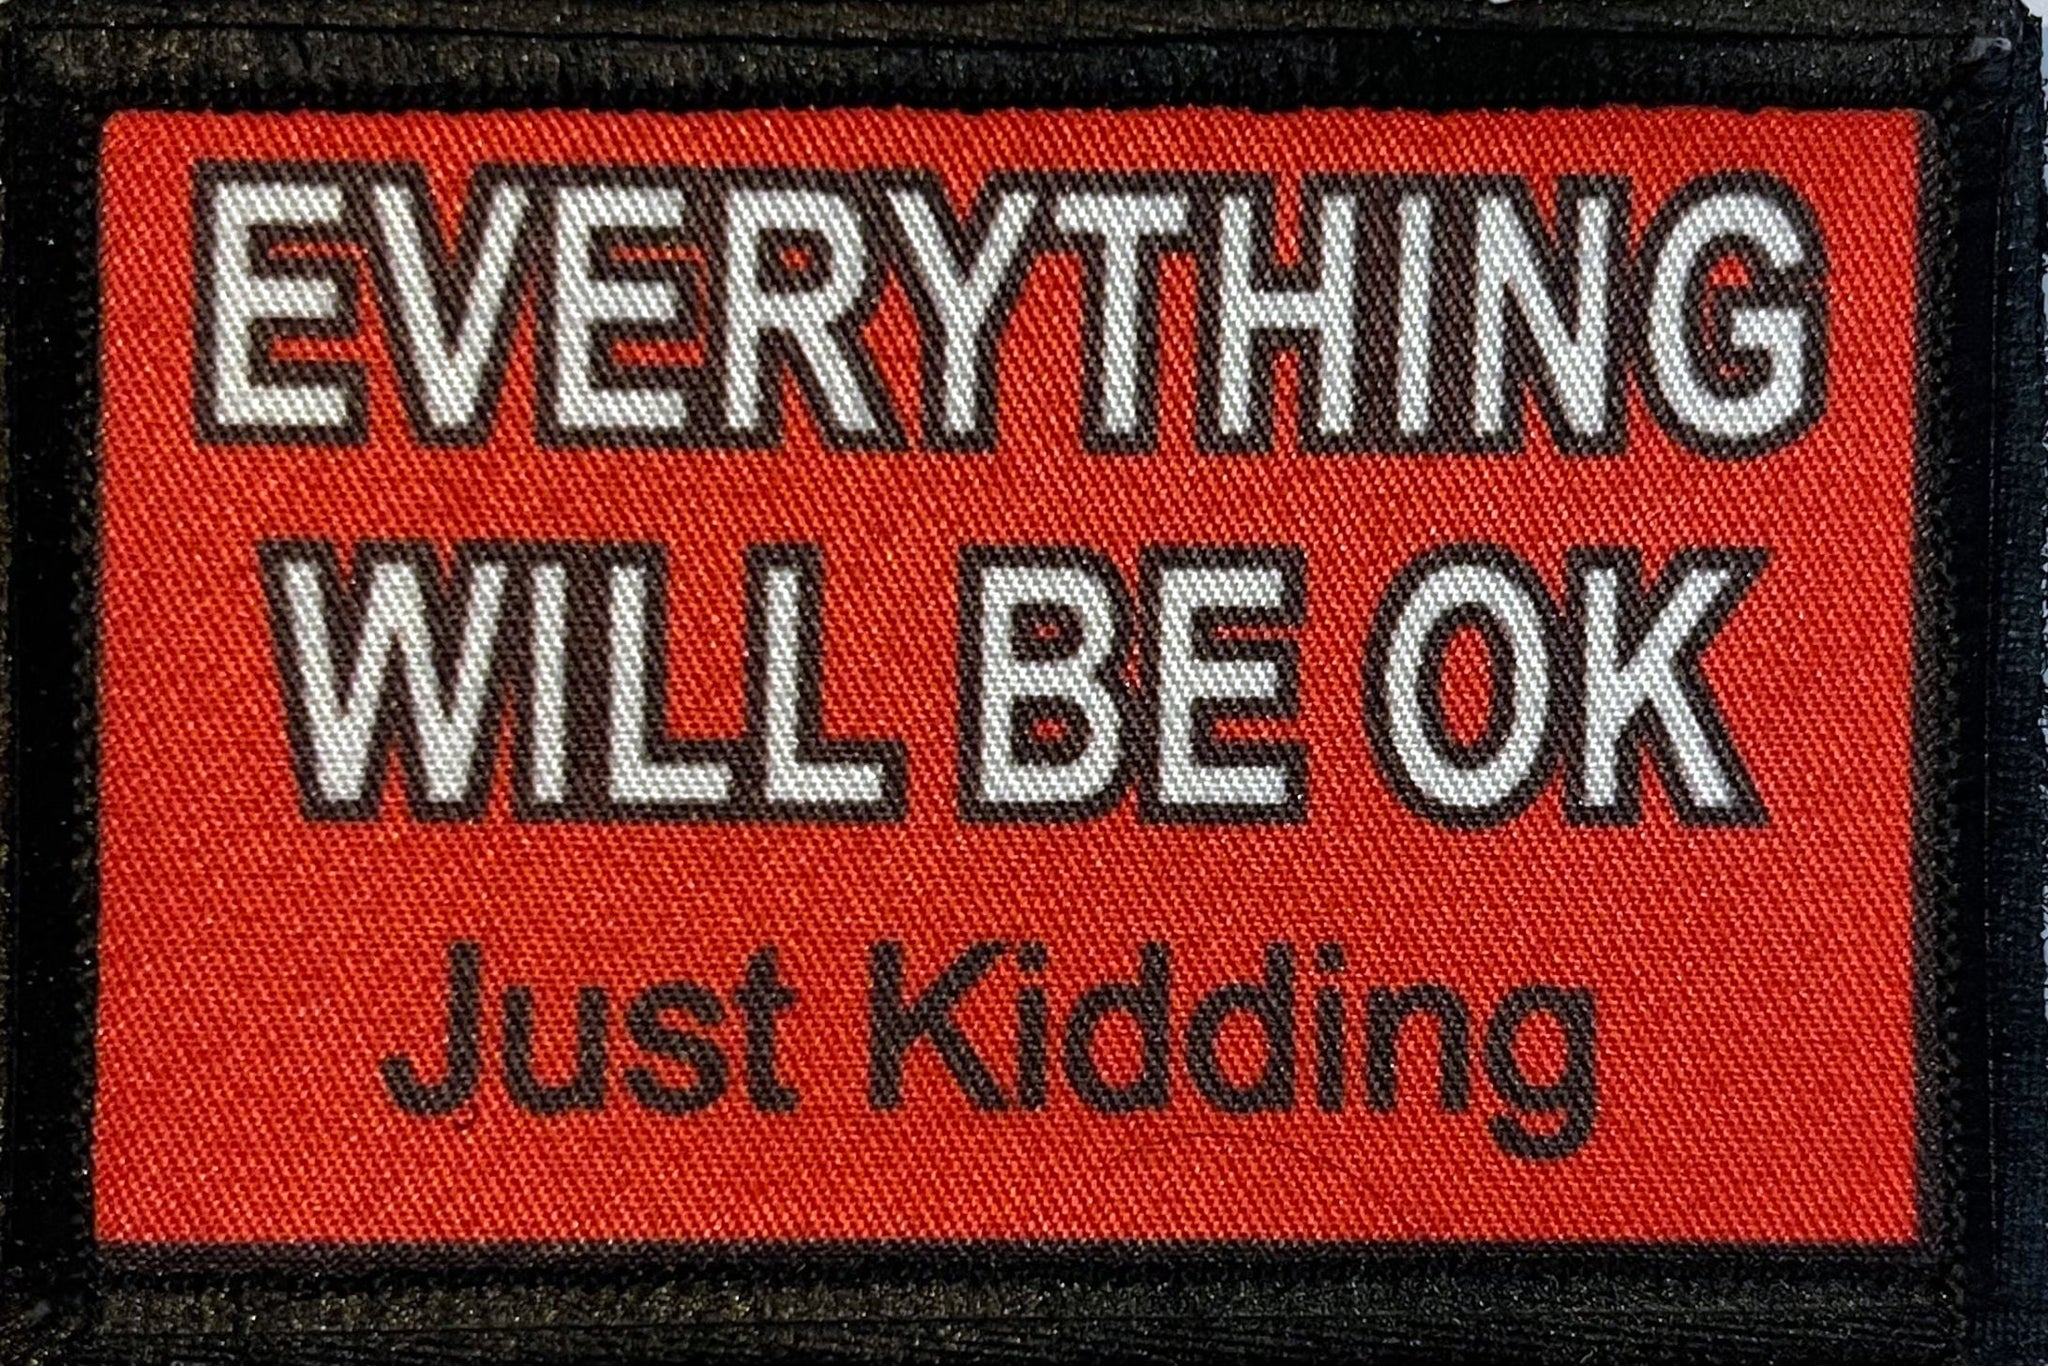 Everything Will Be Ok...Just Kidding Morale Patch Morale Patches Redheaded T Shirts 